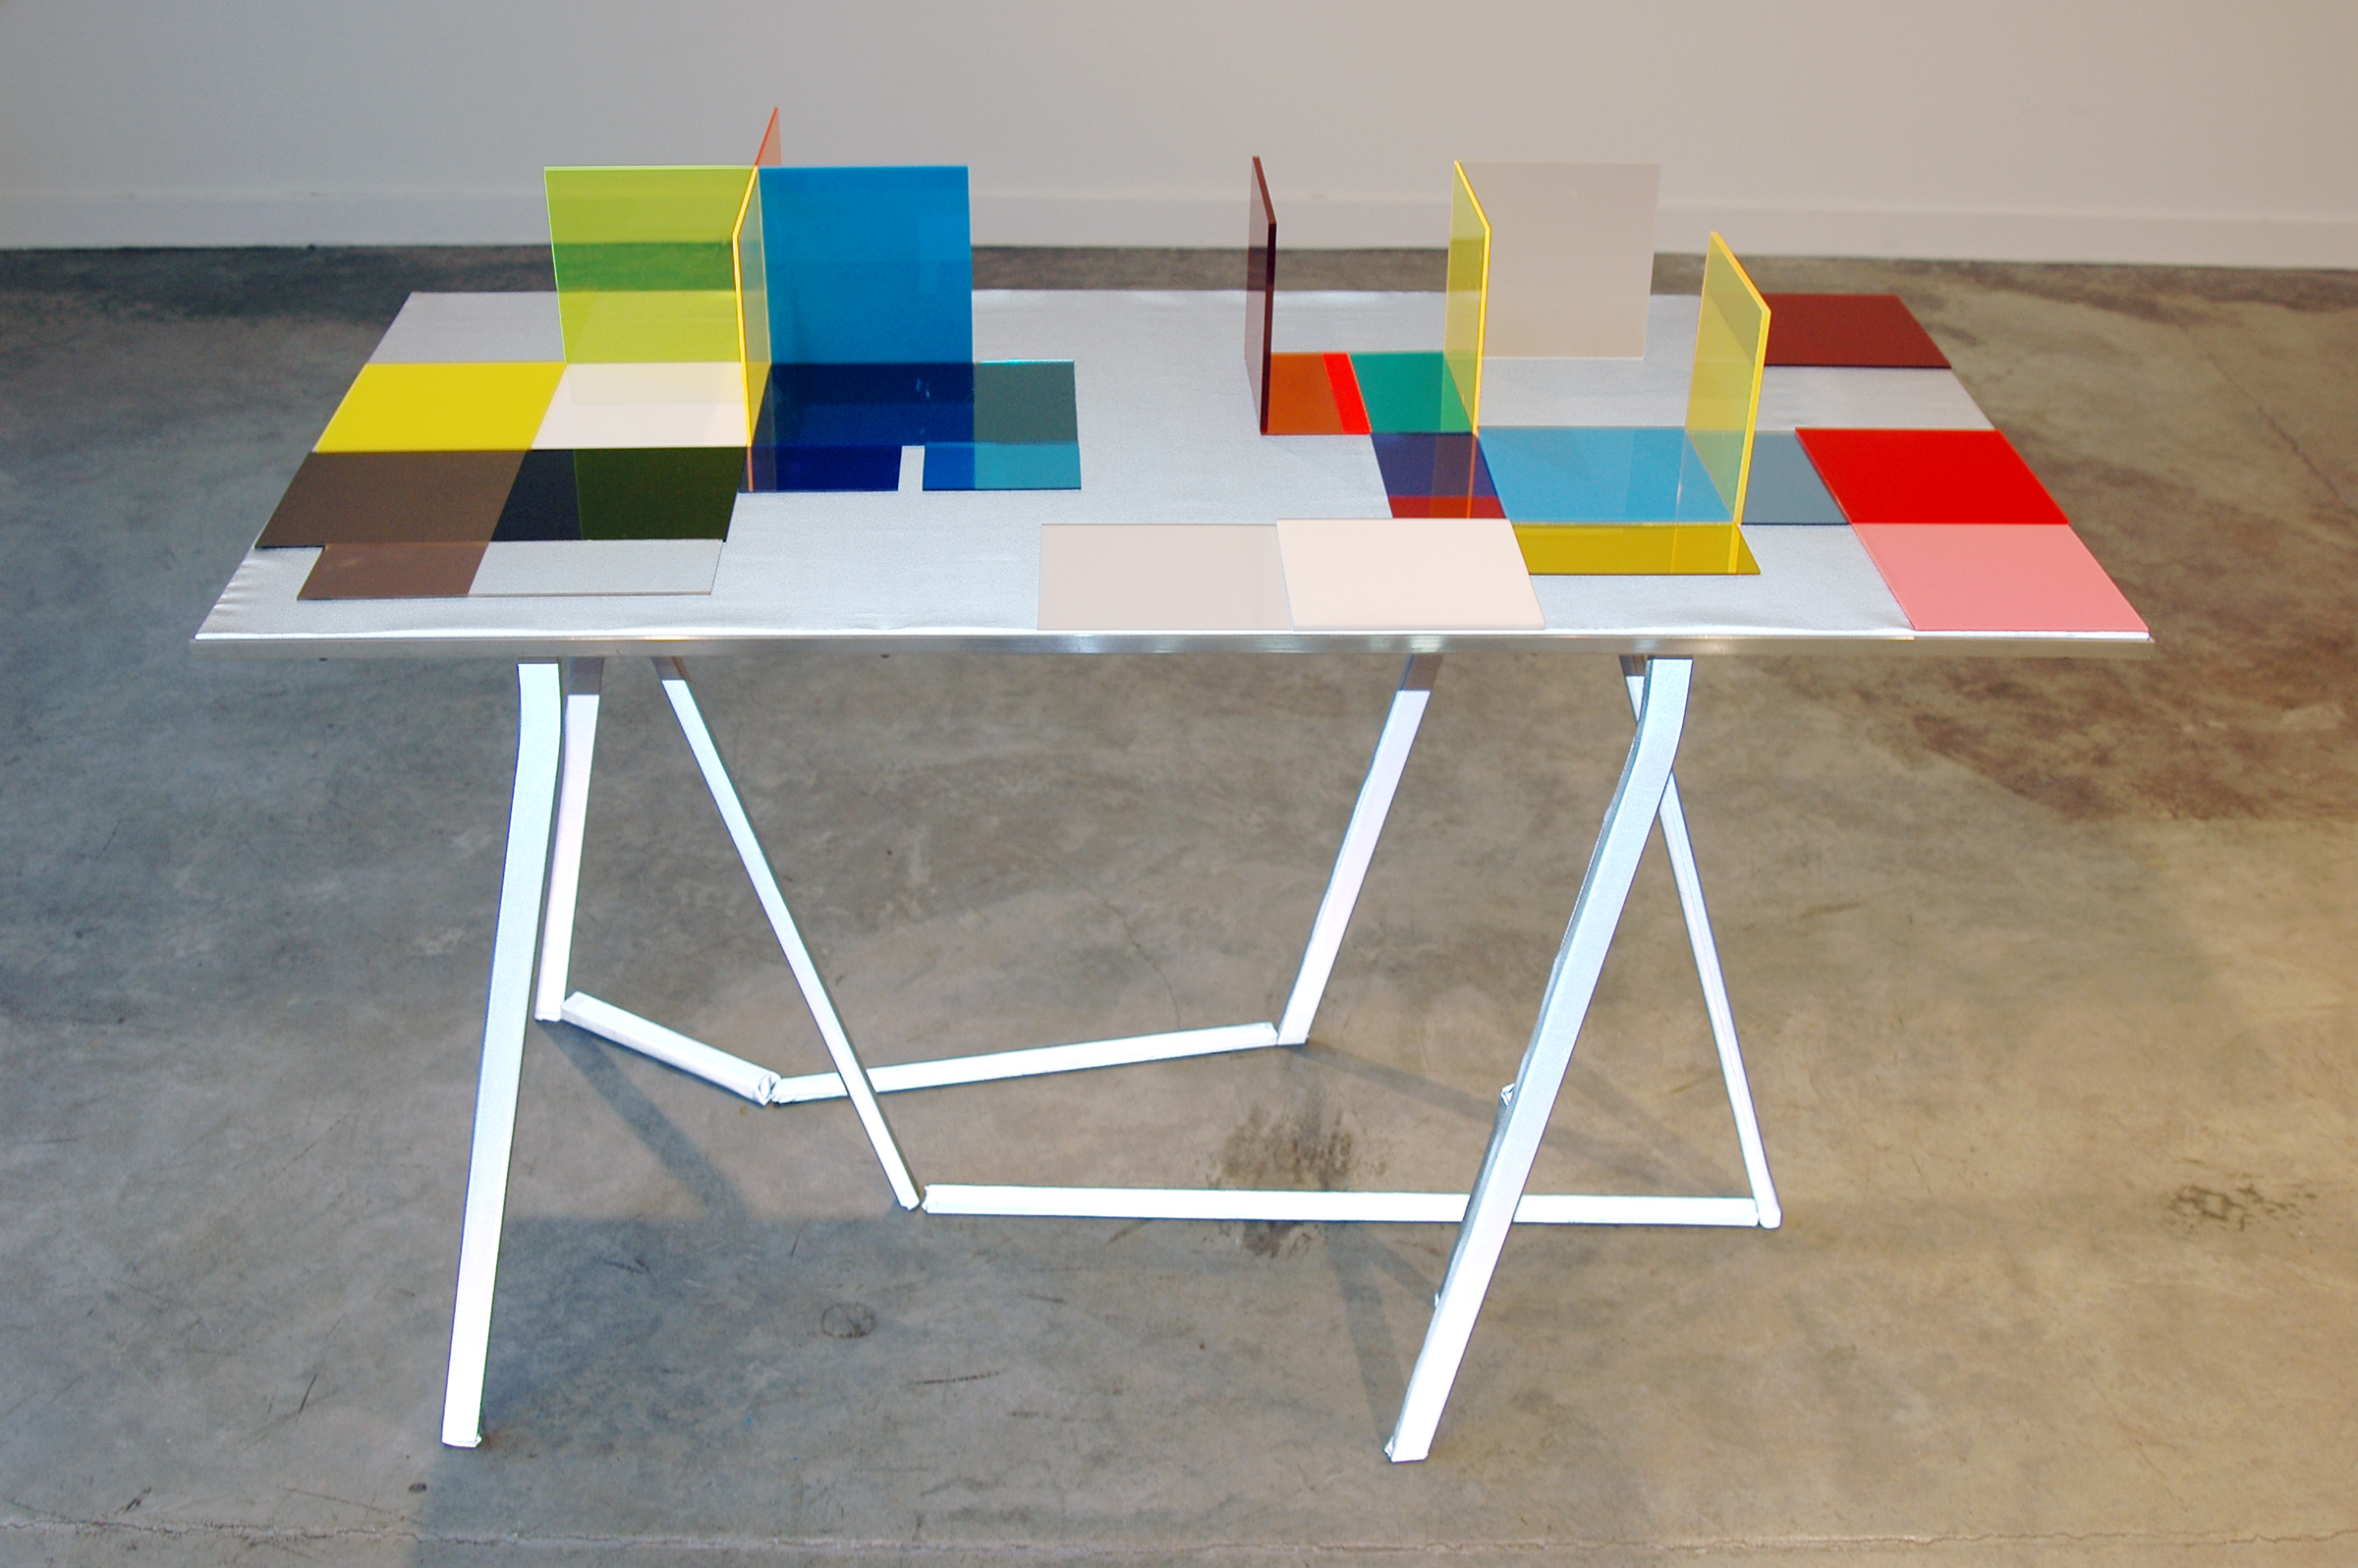   LUCY PULLEN   Hue I , fabric, aluminum, plexi and tape, 23"w x 47"t x 28"h, 2012 